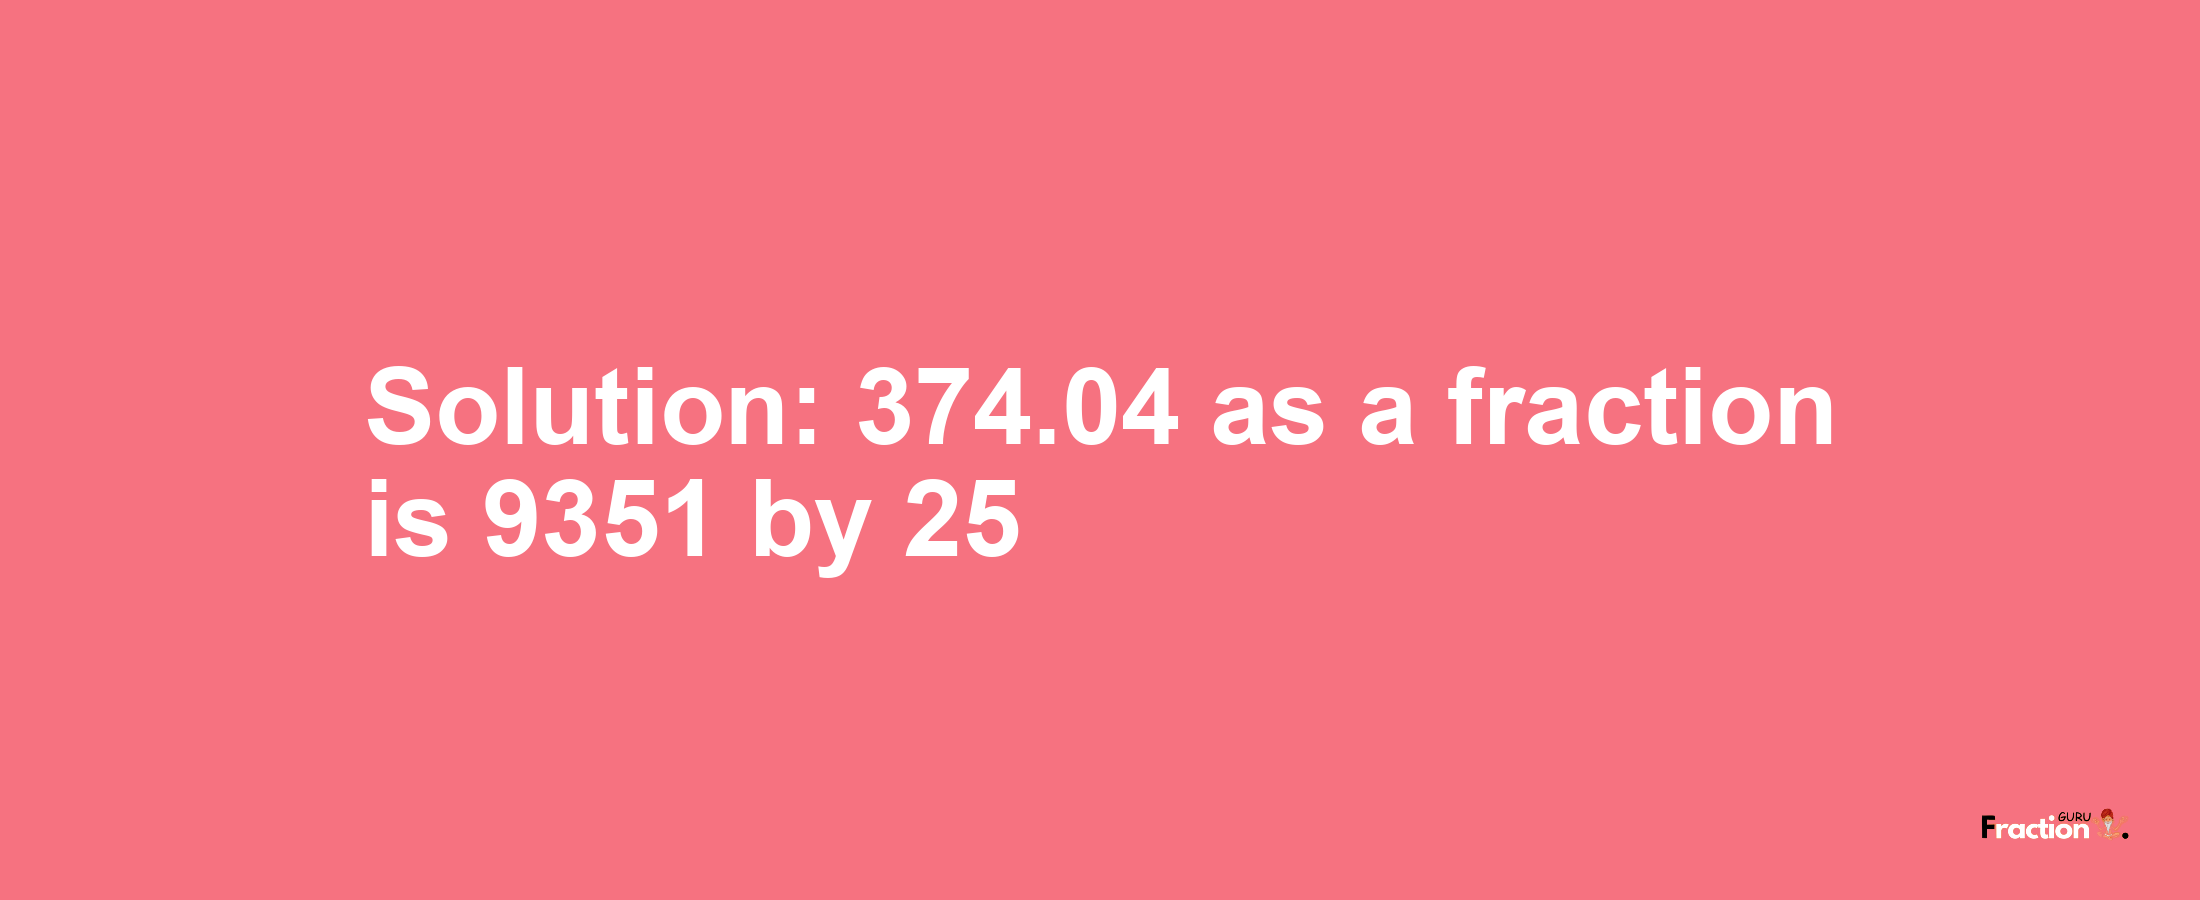 Solution:374.04 as a fraction is 9351/25